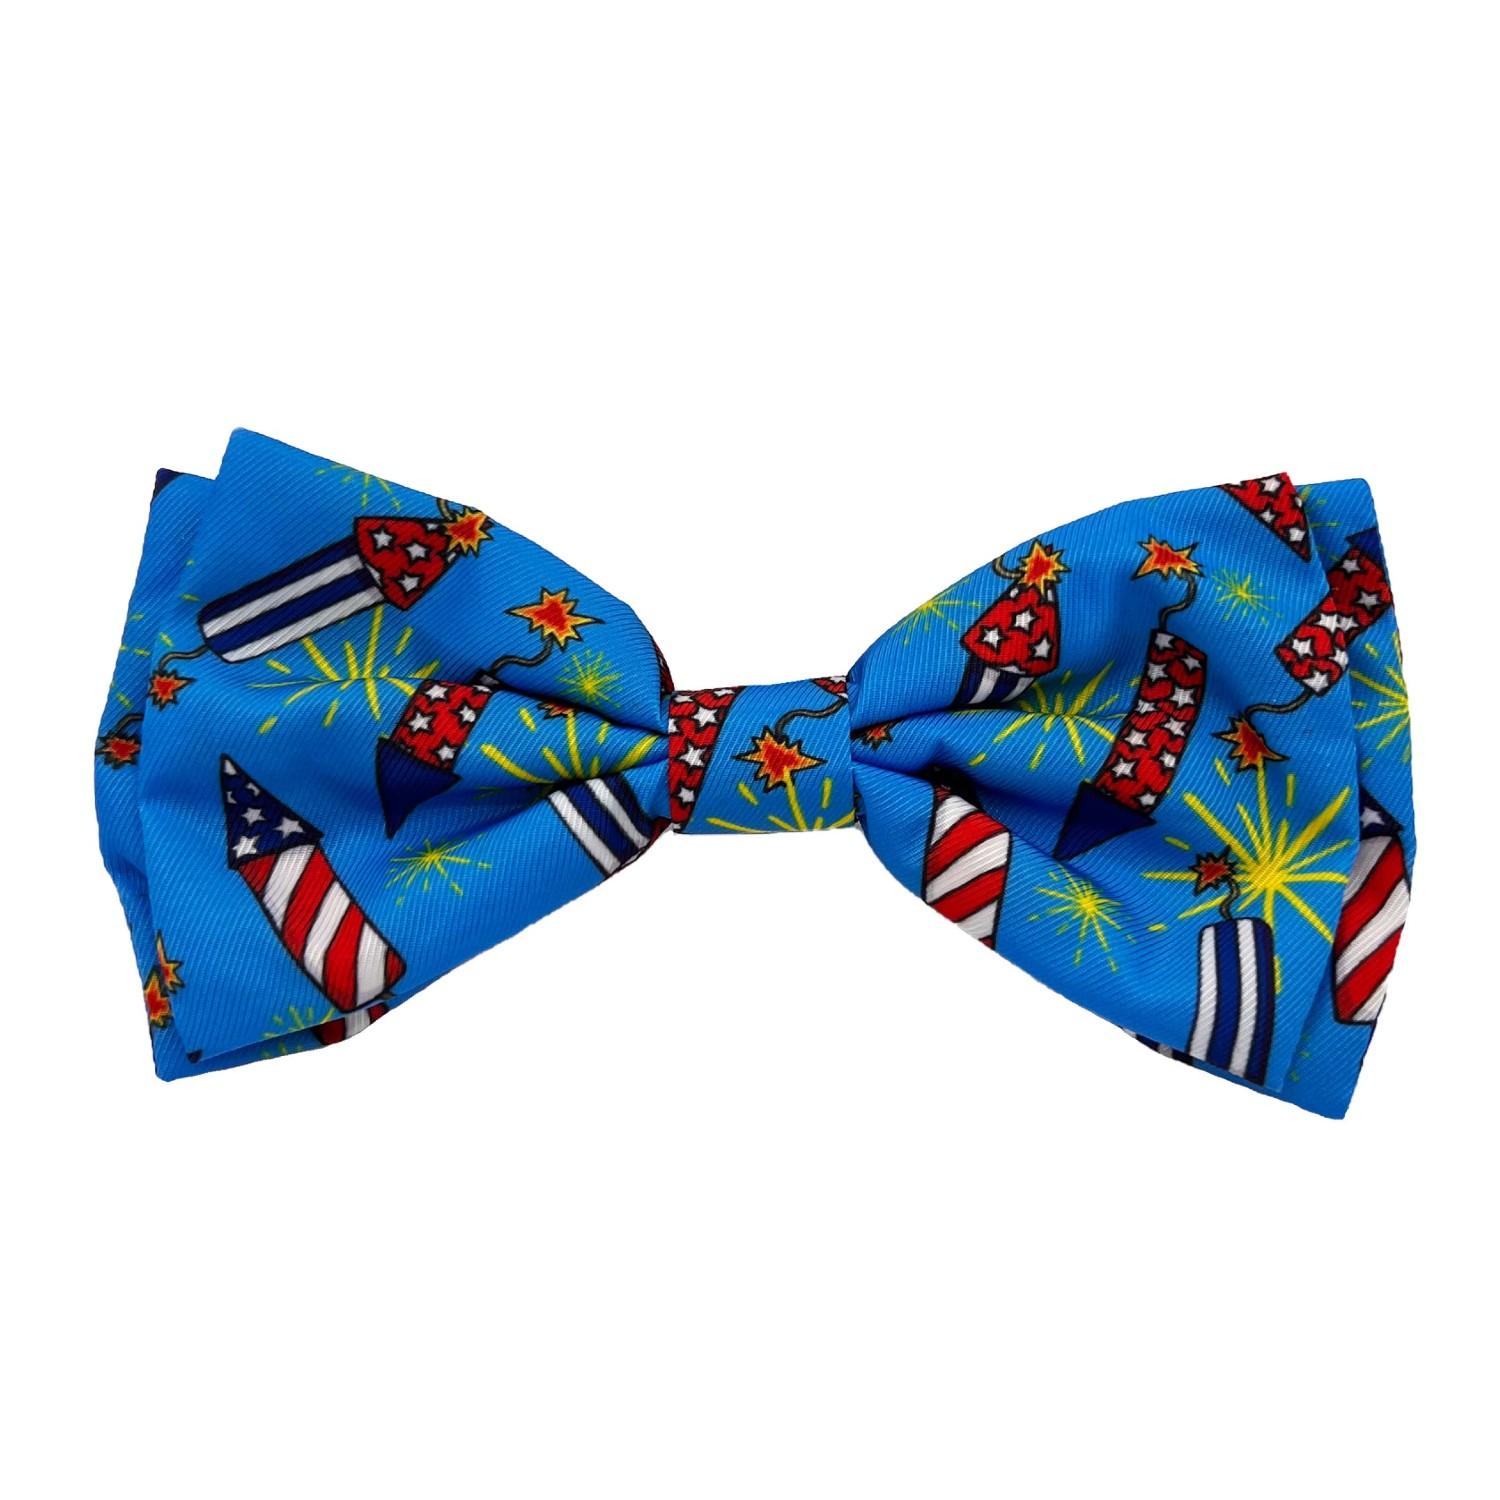 Huxley & Kent Patriotic Dog and Cat Bow Tie Collar Attachment - Firecrackers